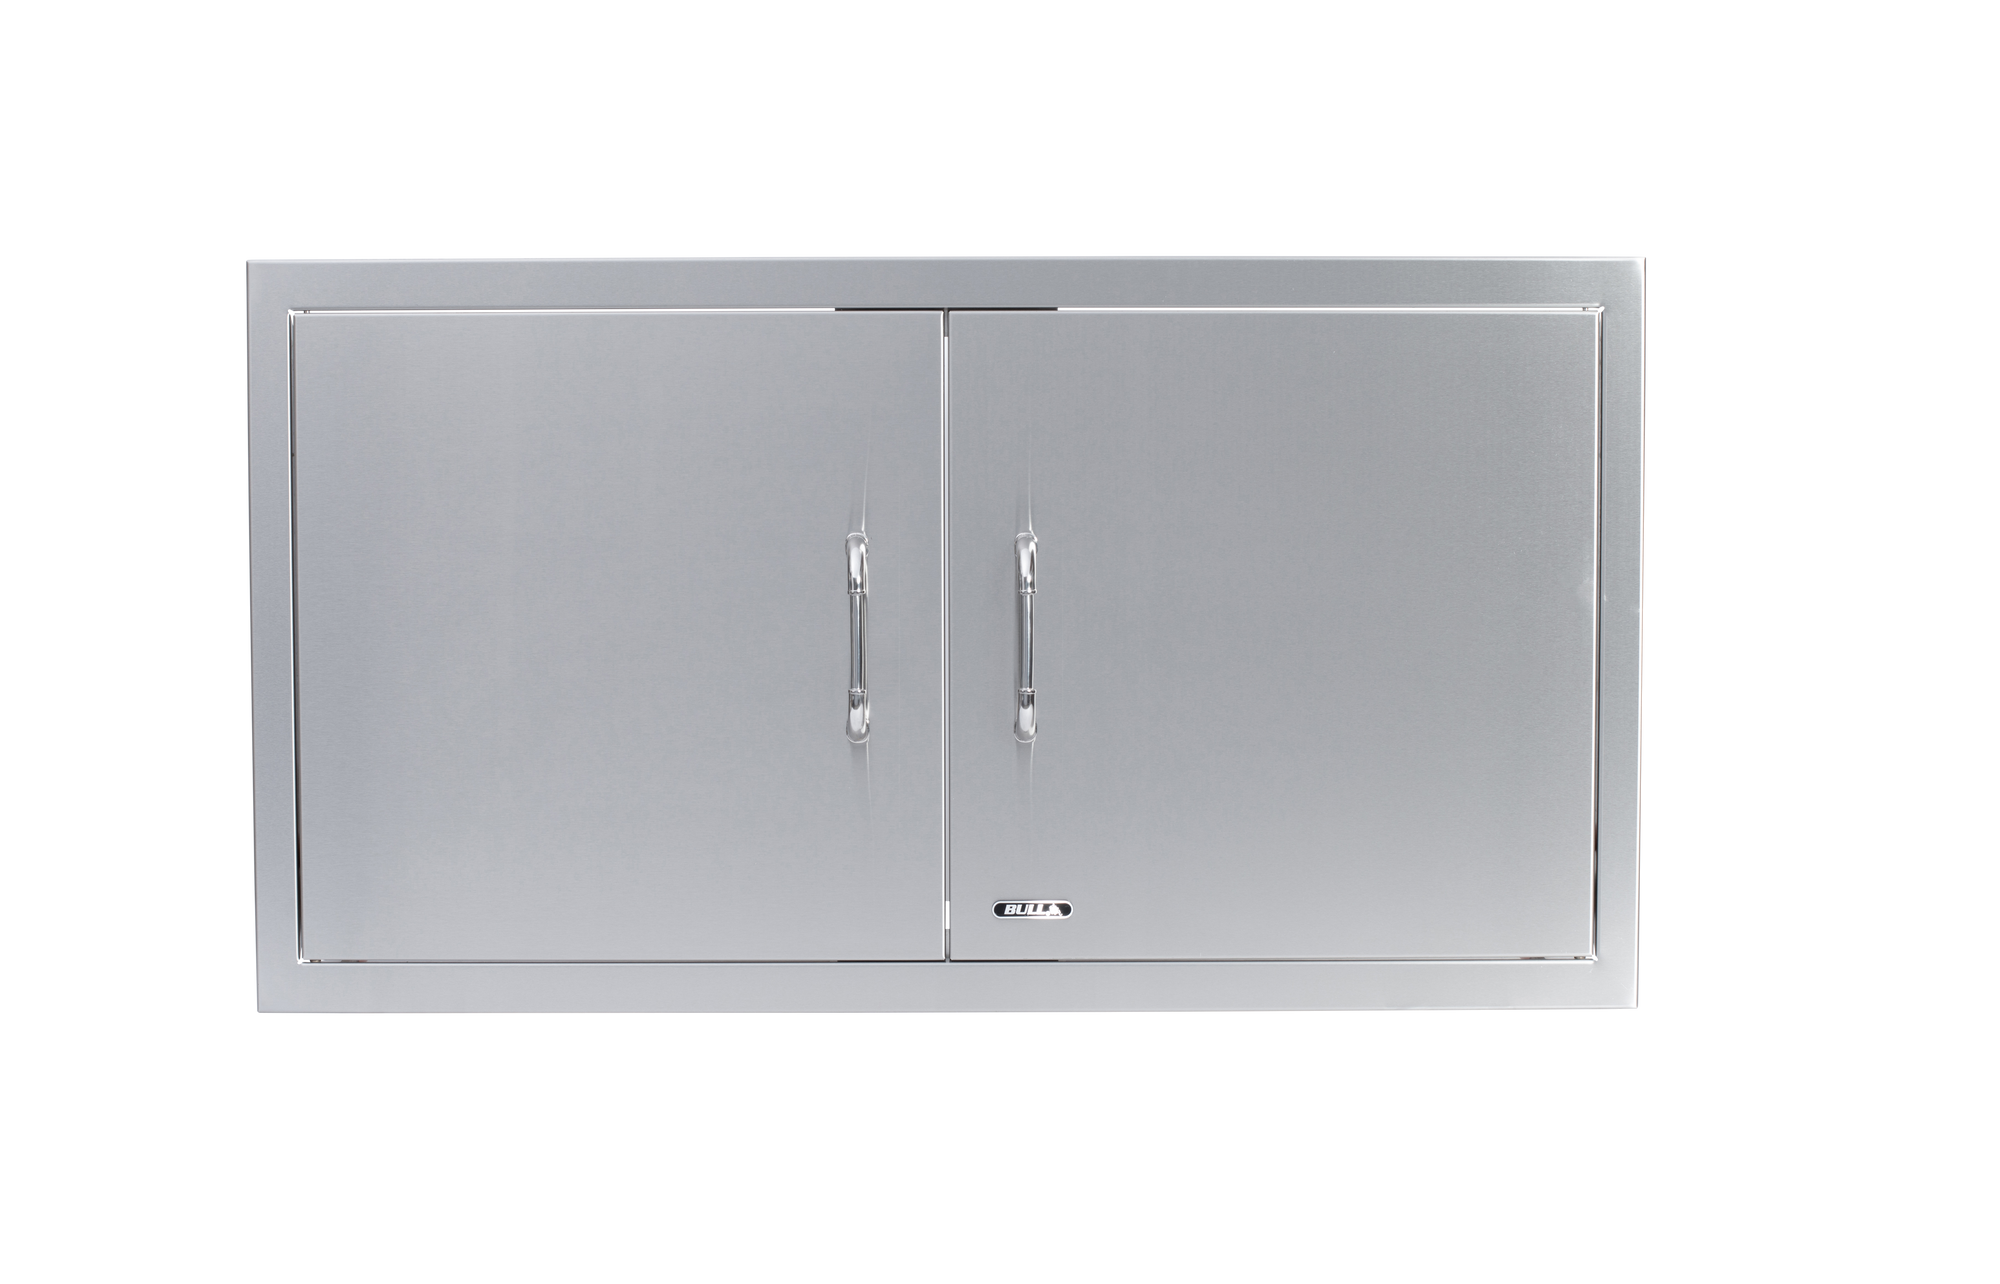 Bull 38-Inch Stainless Steel Double Doors with Reveal Design